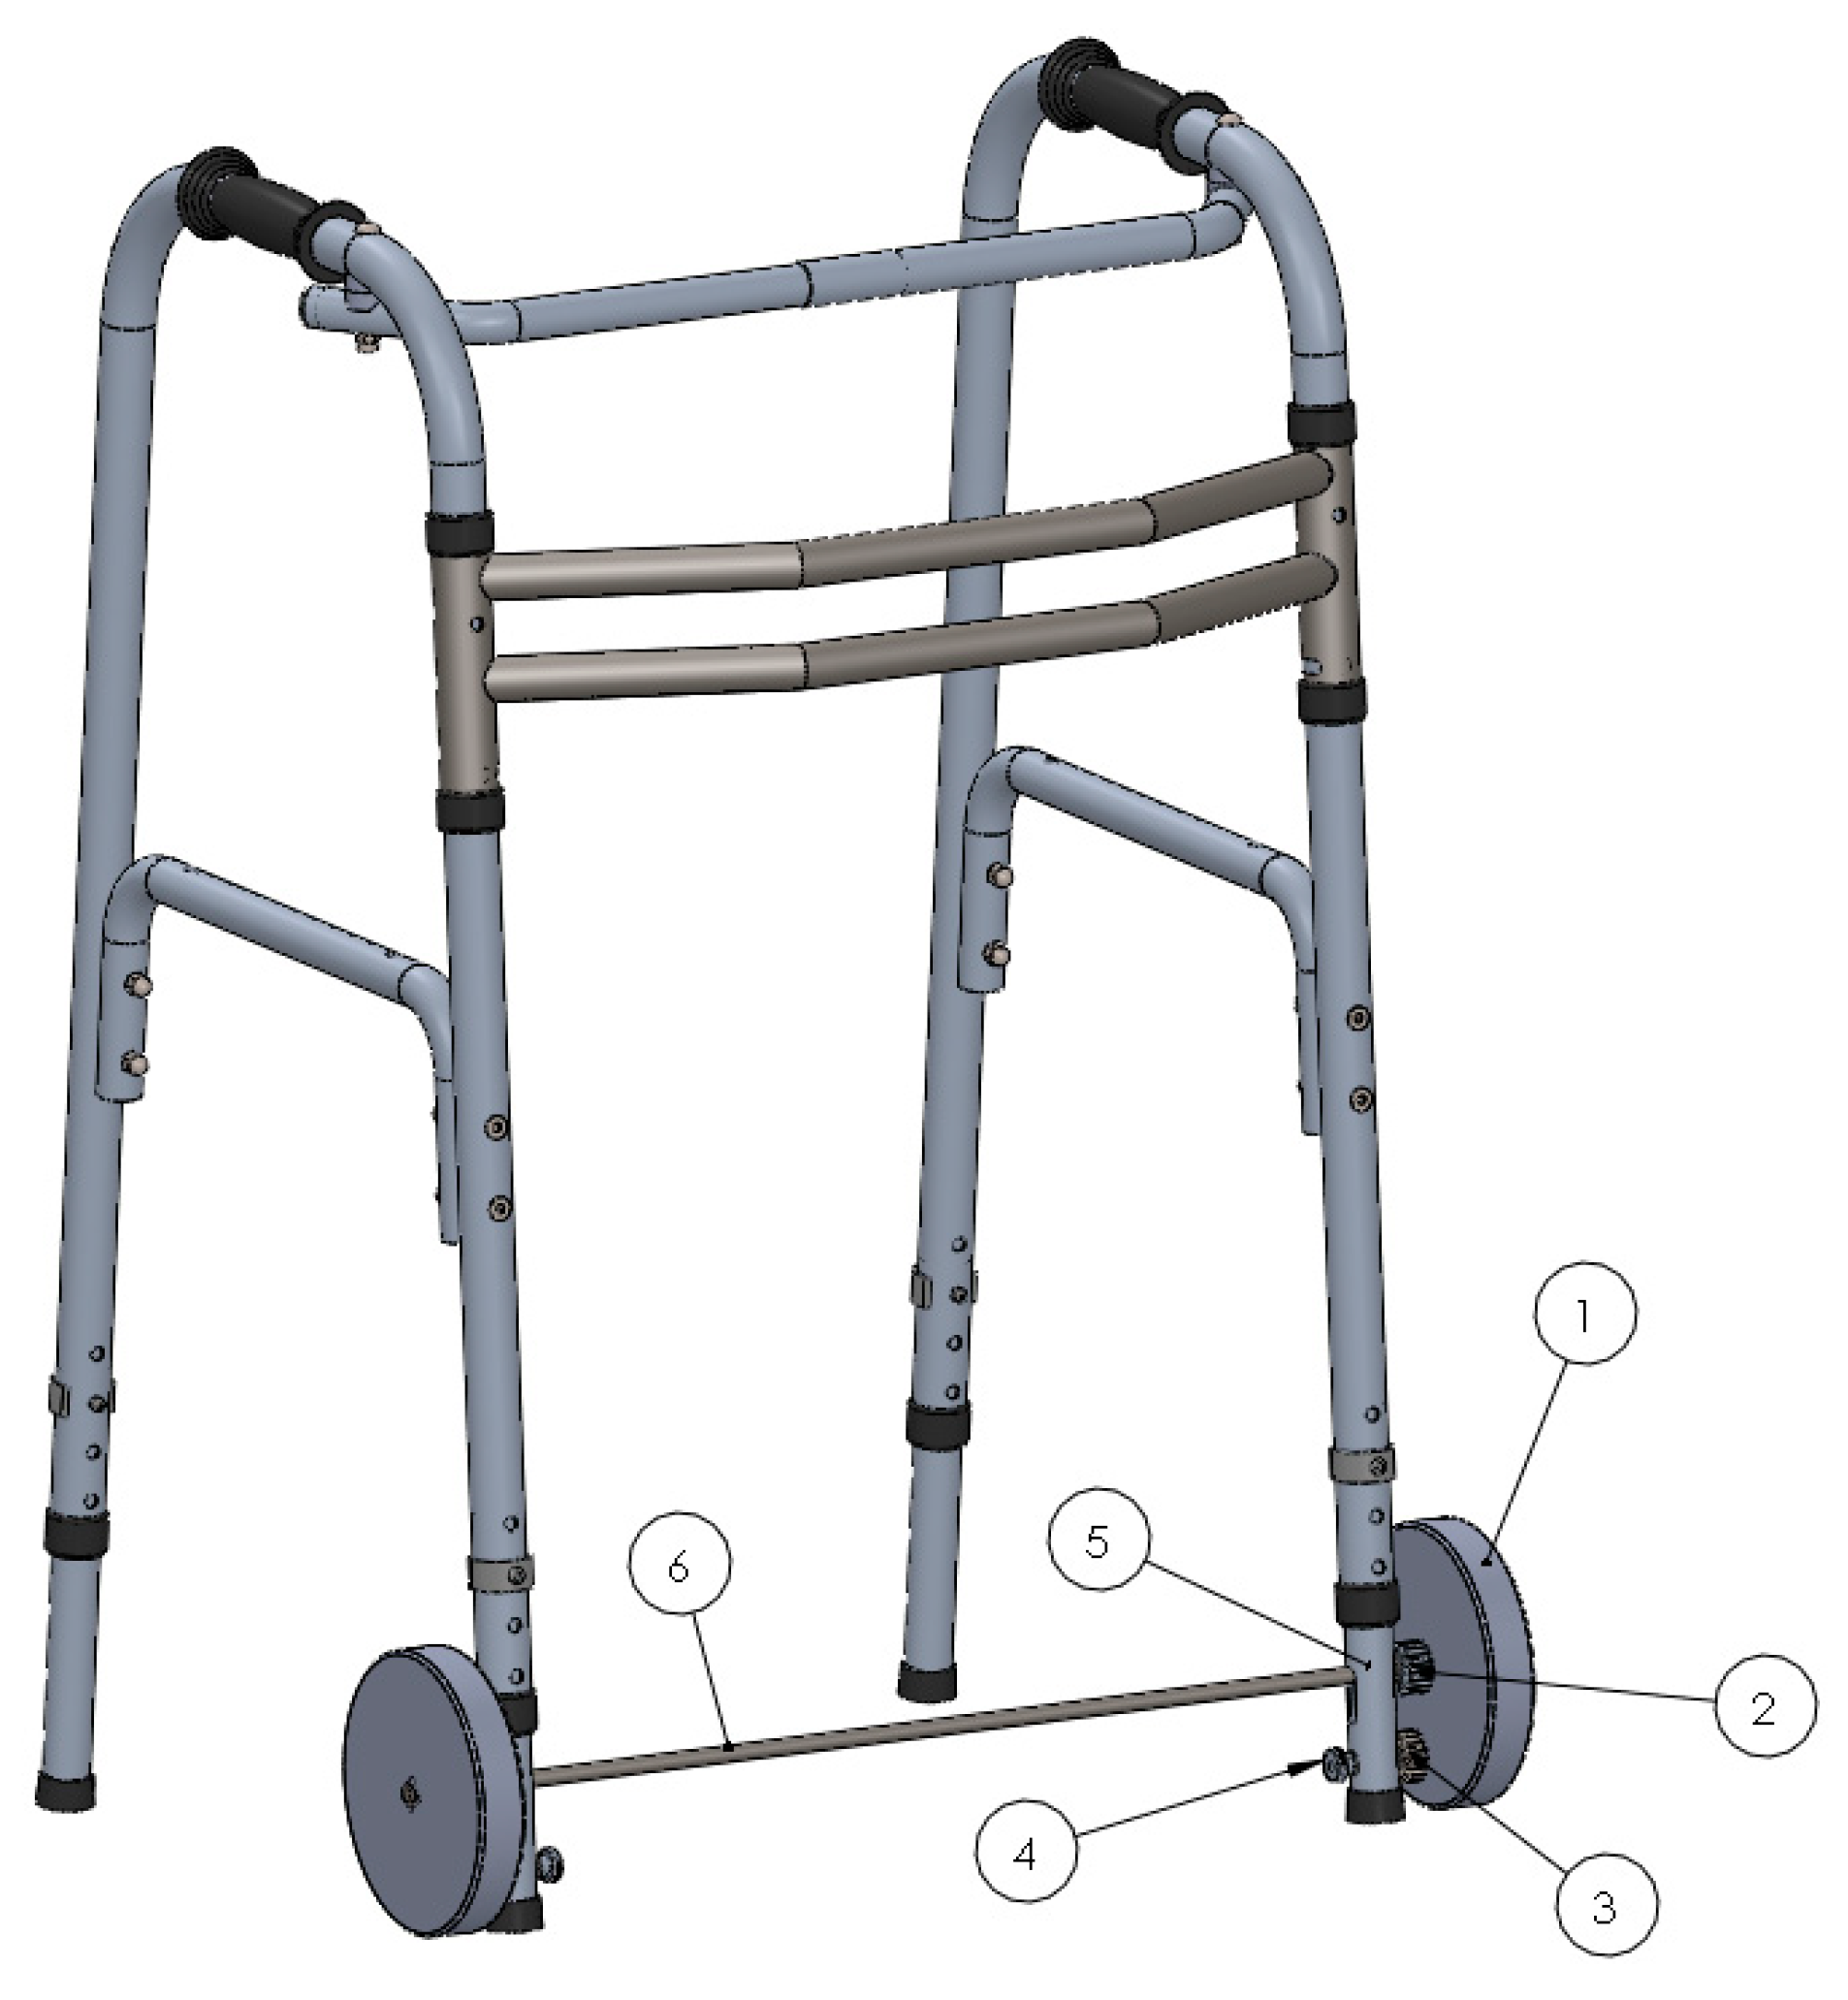 oosters anders Ijzig IJERPH | Free Full-Text | An Innovative Concept for a Walker with a  Self-Locking Mechanism Using a Single Mechanical Approach